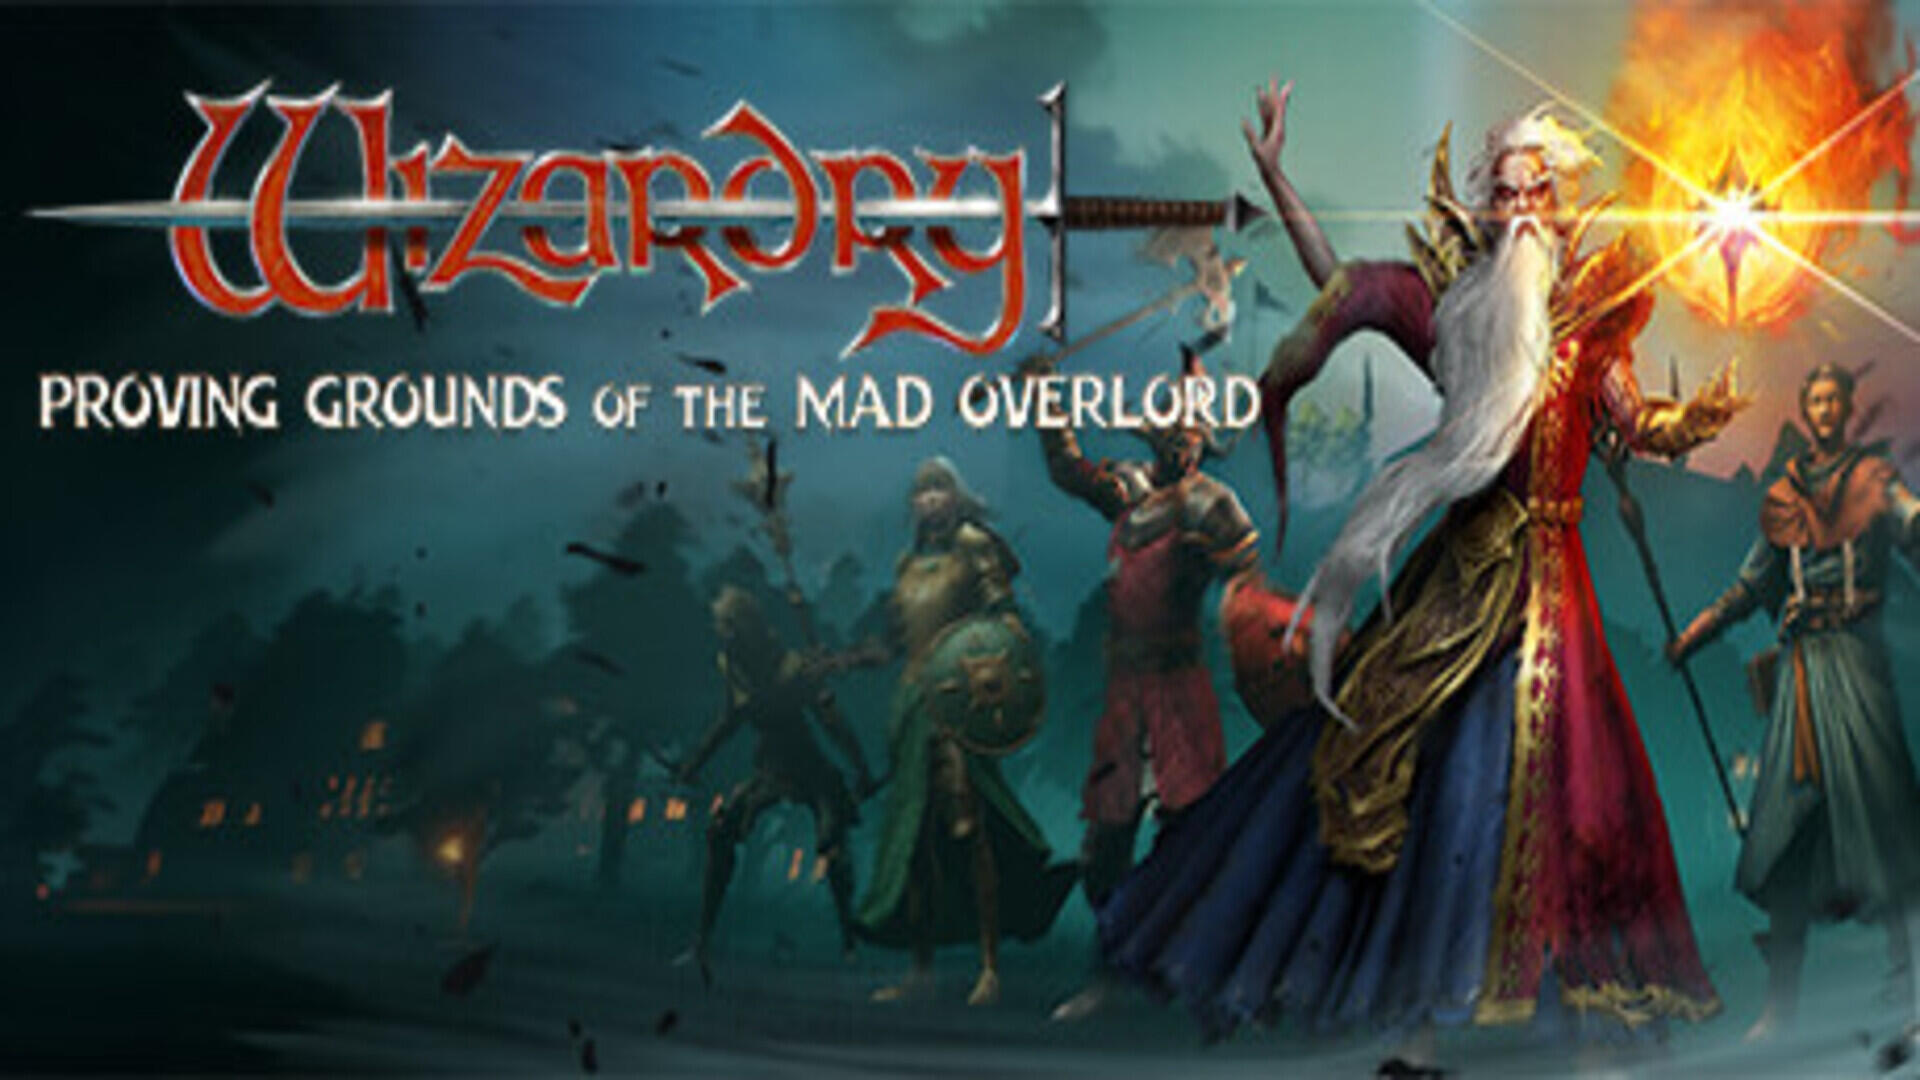 Wizardry: Proving Grounds of the Mad Overlord – Free Download (v1.0.2)